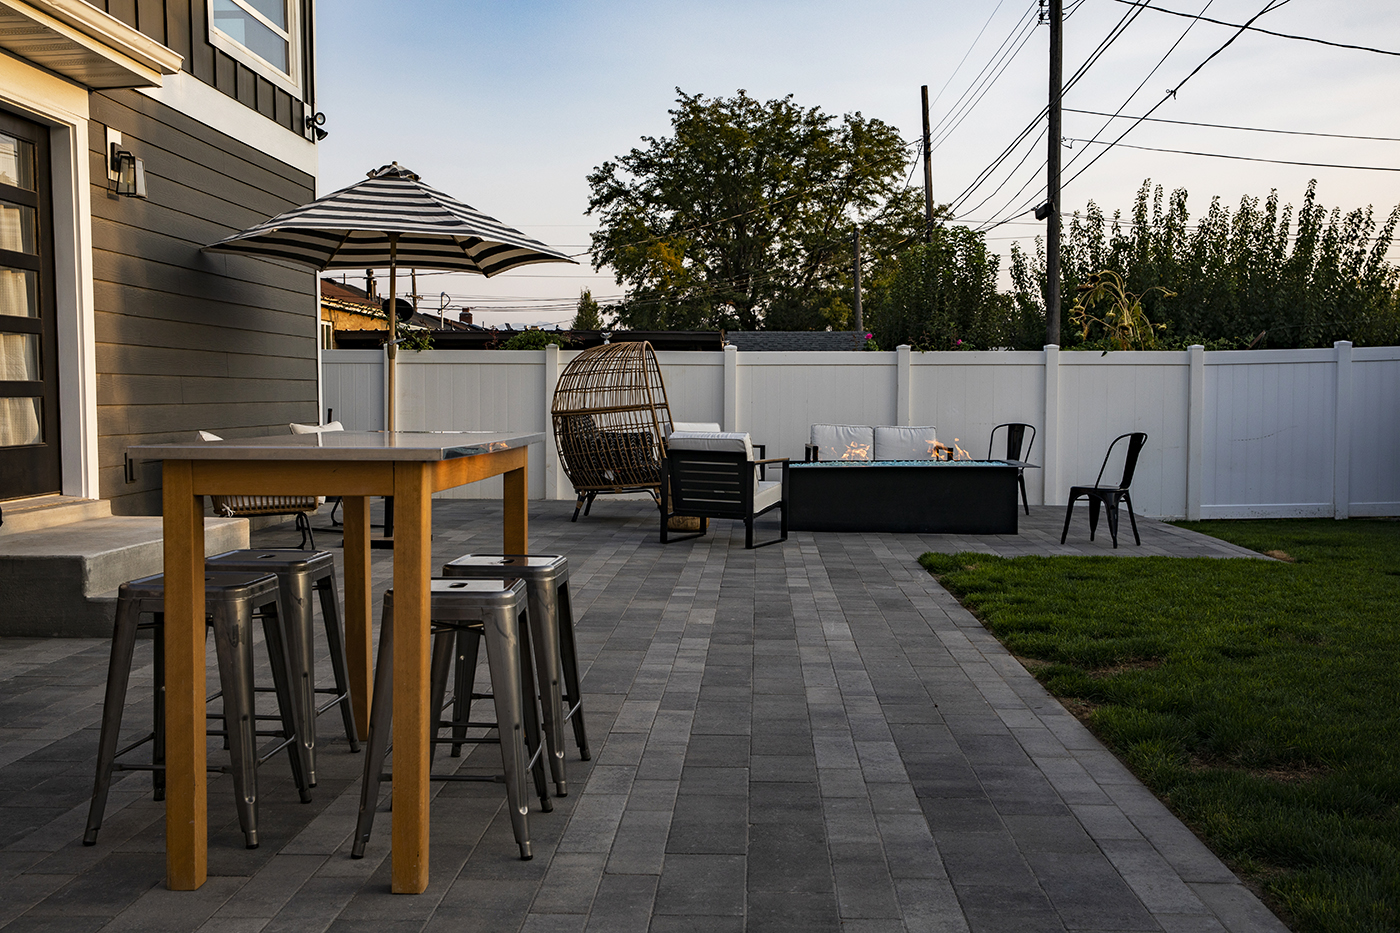 Bar height outdoor dining sets are great for entertaining, but without a solid place to set the table, like these pavers, it would be difficult to enjoy your meal. Big Rock Landscaping will make your outdoor dining dreams come true with thoughtful plans and professional installation.